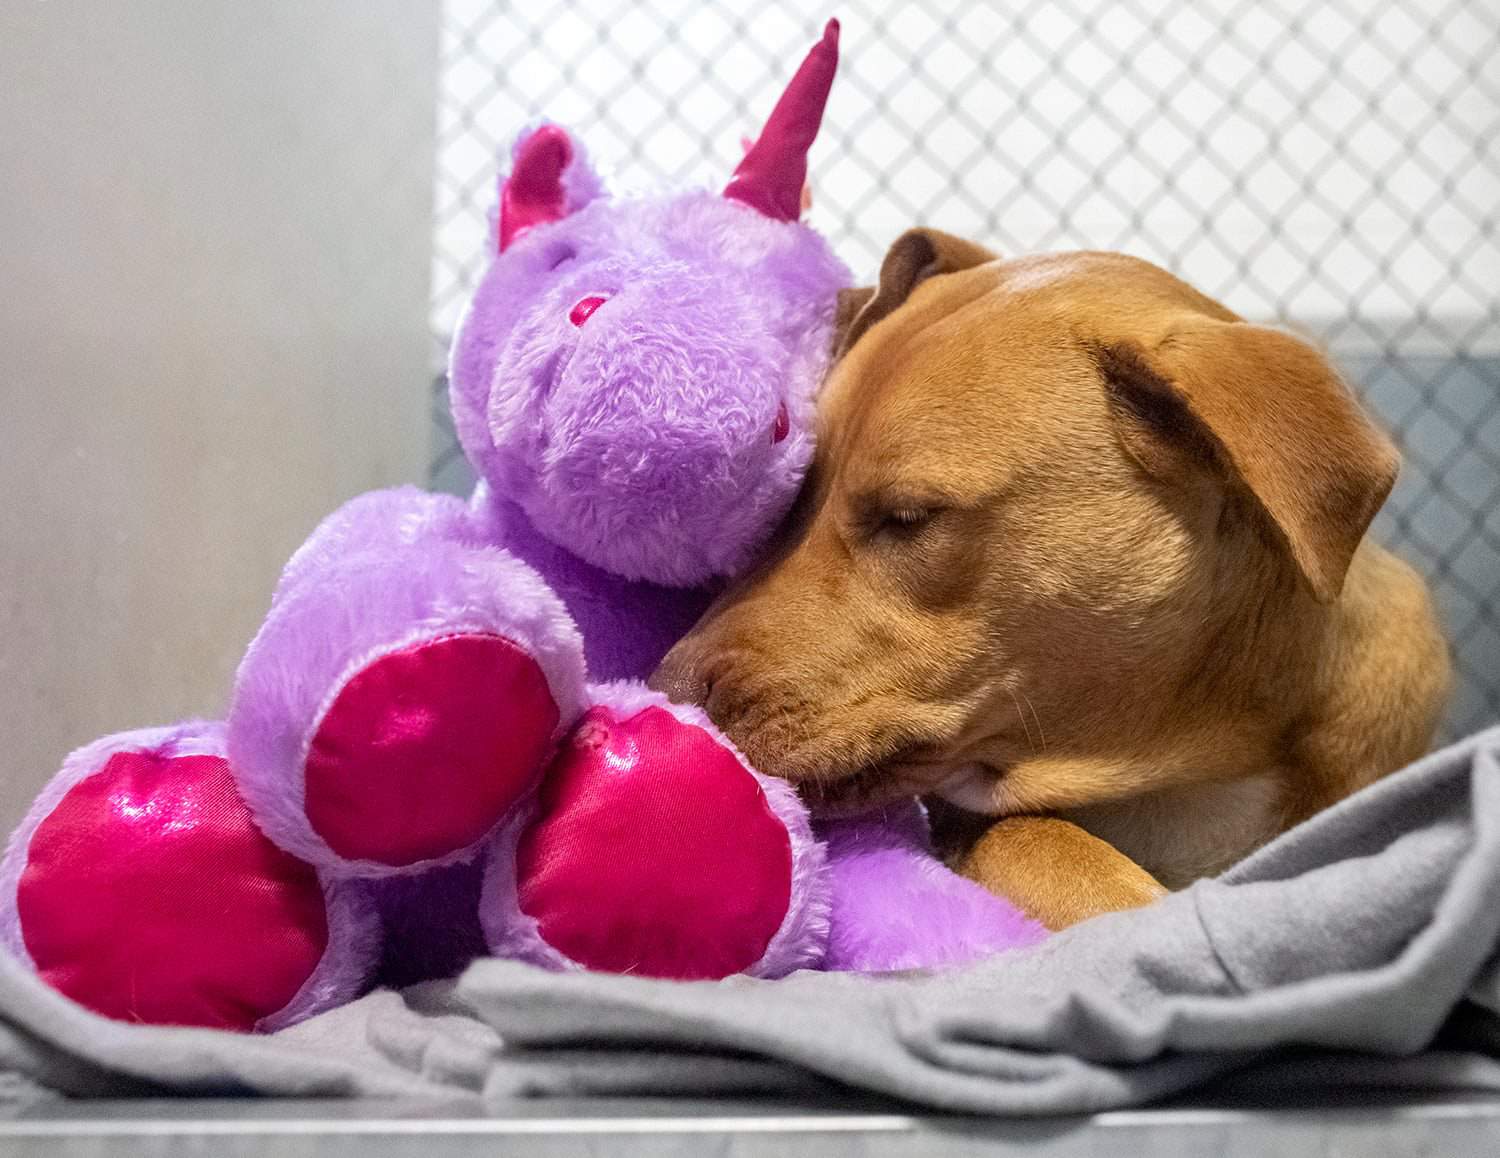 This cute dog stole a unicorn toy five times from a store before he was rescued, shelter says